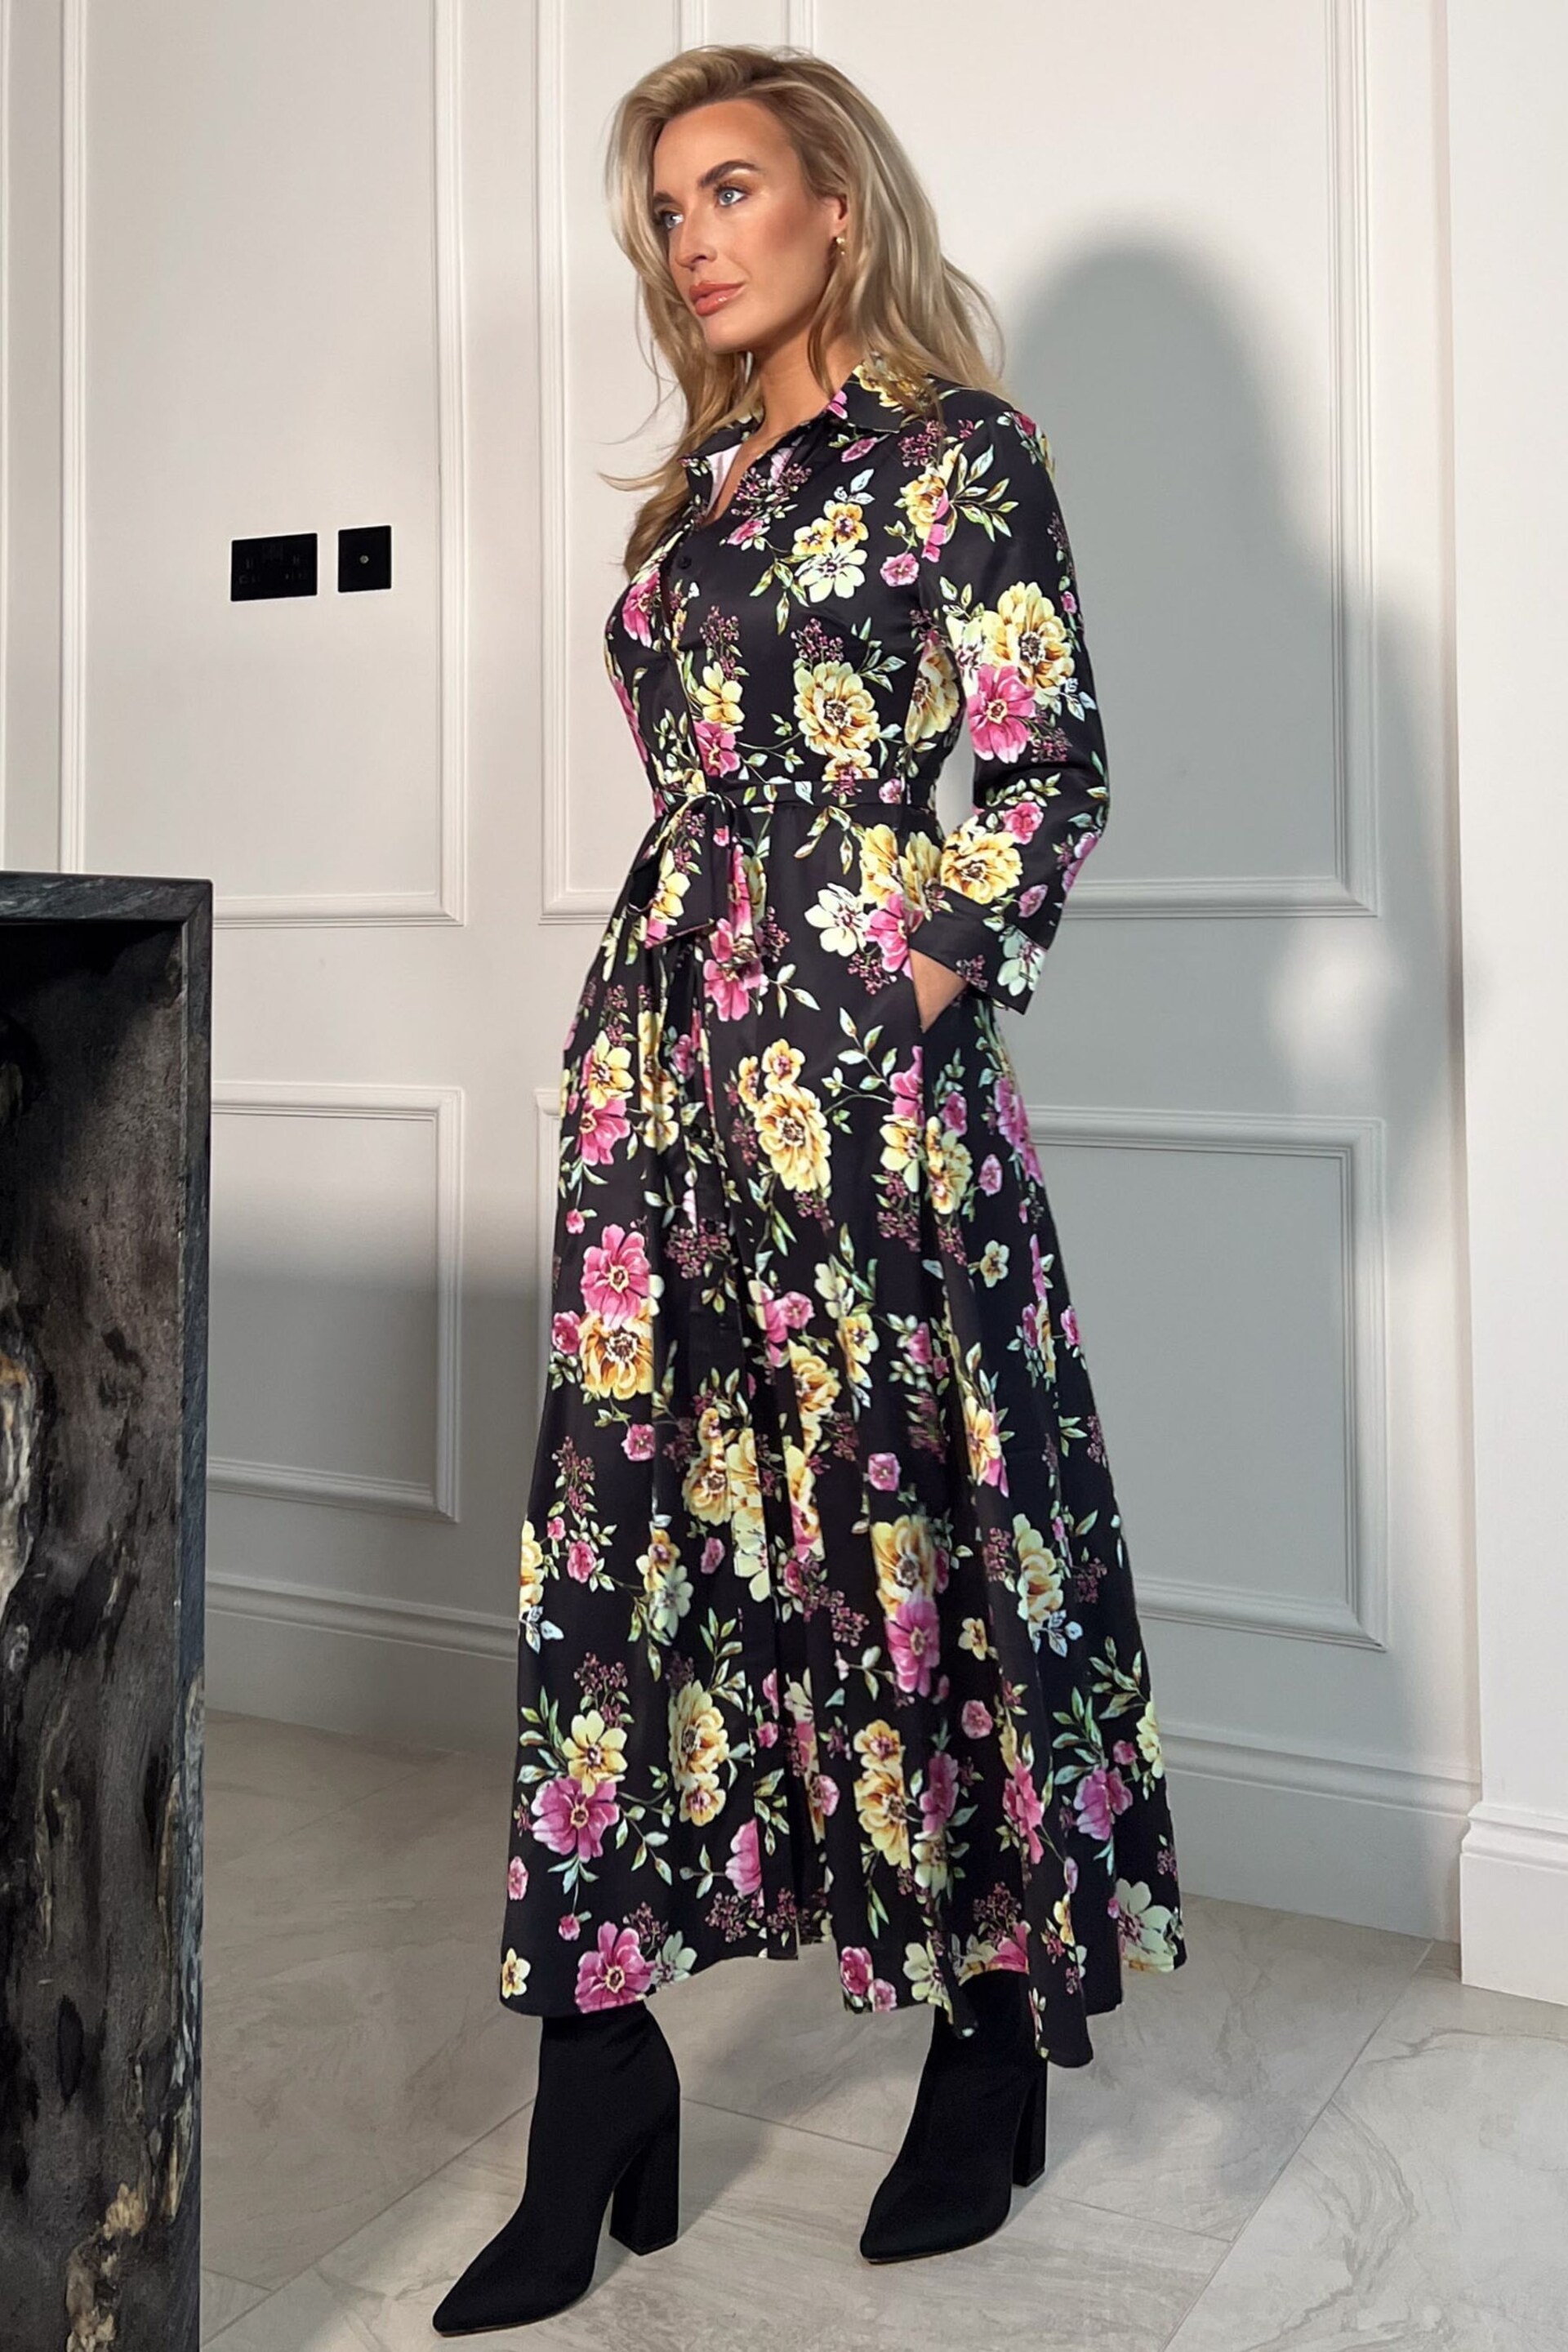 Girl In Mind Black Floral Brielle Shirt Maxi Dress - Image 2 of 4